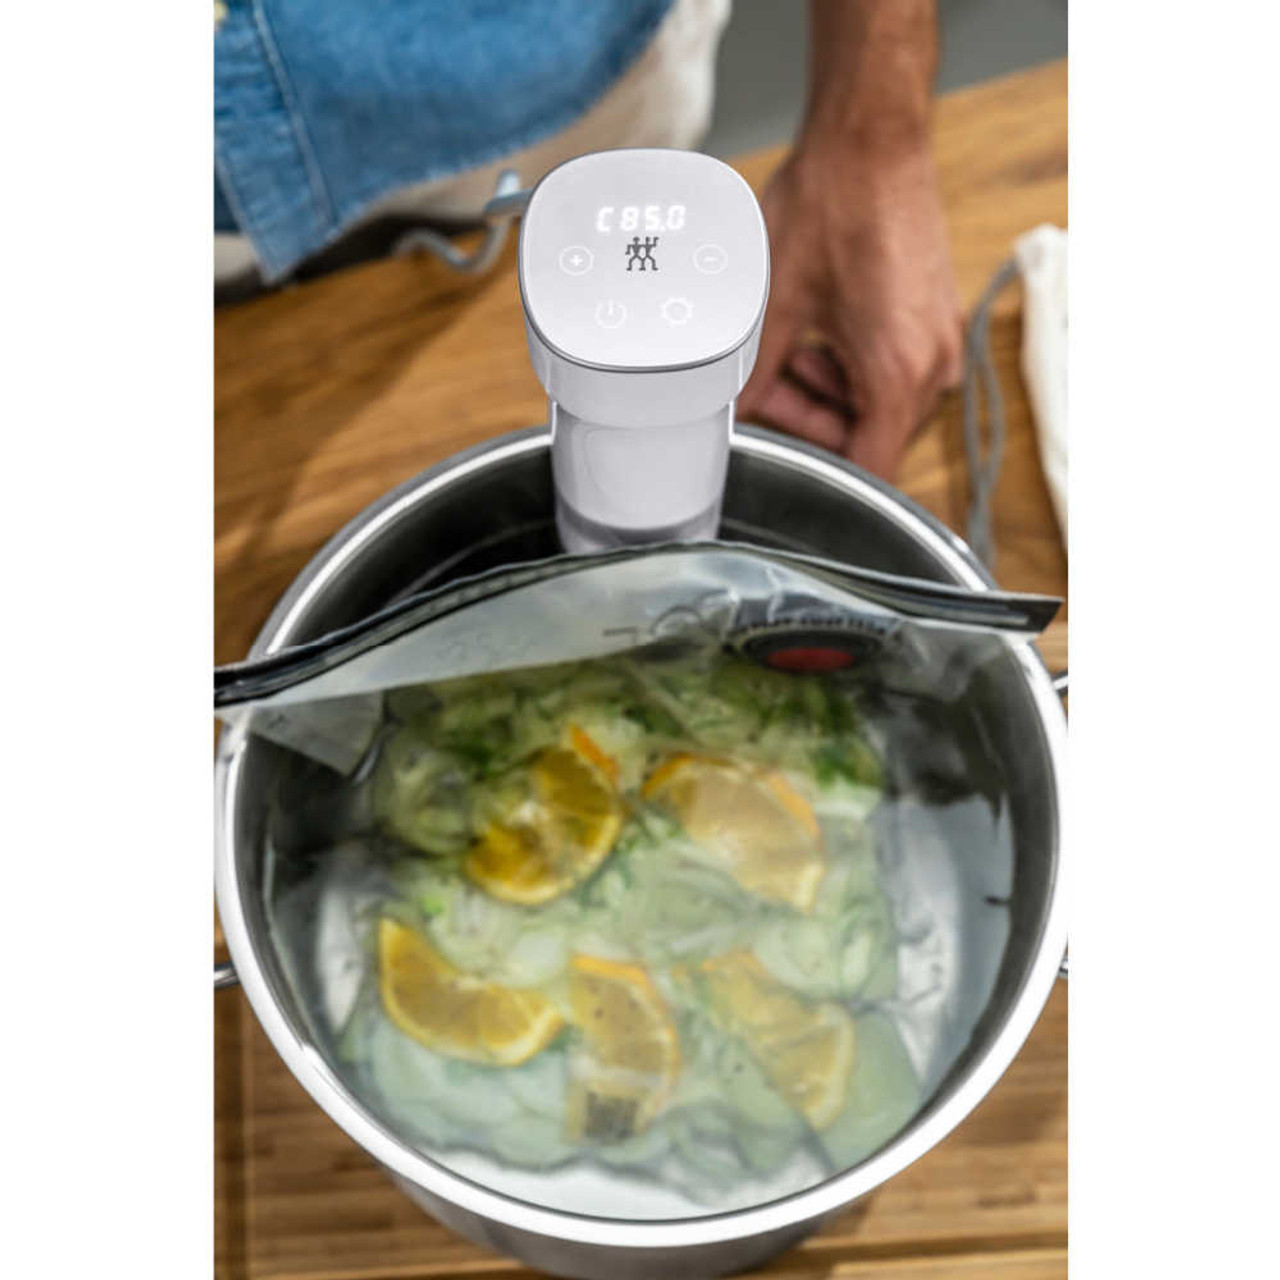 https://cdn11.bigcommerce.com/s-hccytny0od/images/stencil/1280x1280/products/4370/17038/Zwilling_Enfinigy_Sous_Vide_Stick_1__69193.1635376322.jpg?c=2?imbypass=on